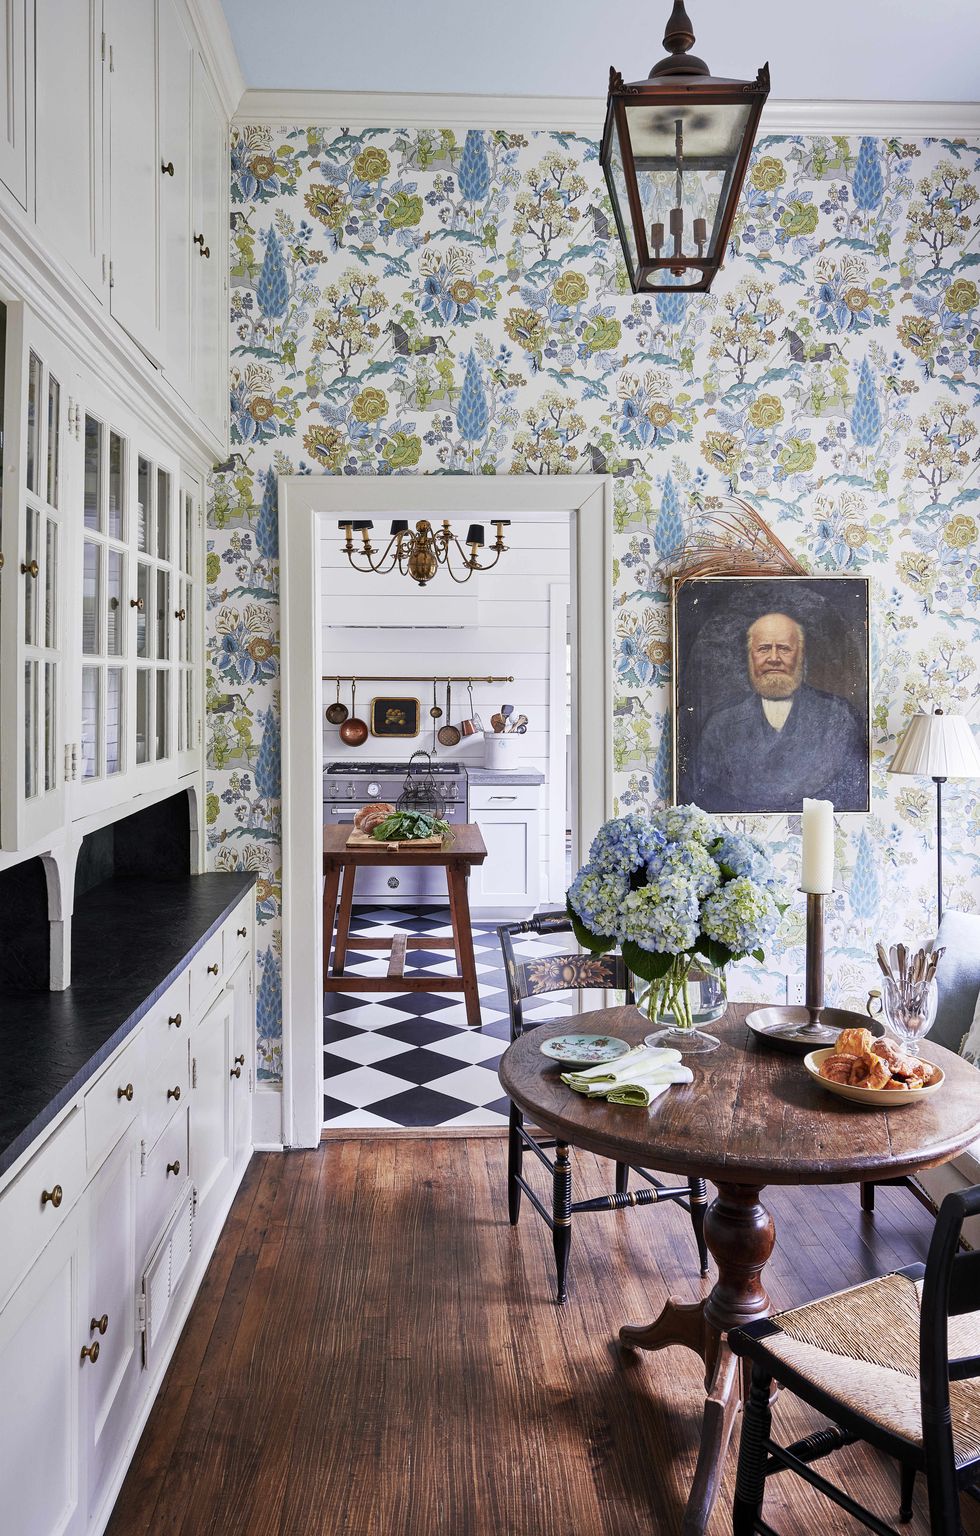 for the breakfast room and kitchen an animated wall pattern first developed in the early 20th century with graphic black and white flooring true to american farmhouse vernacular